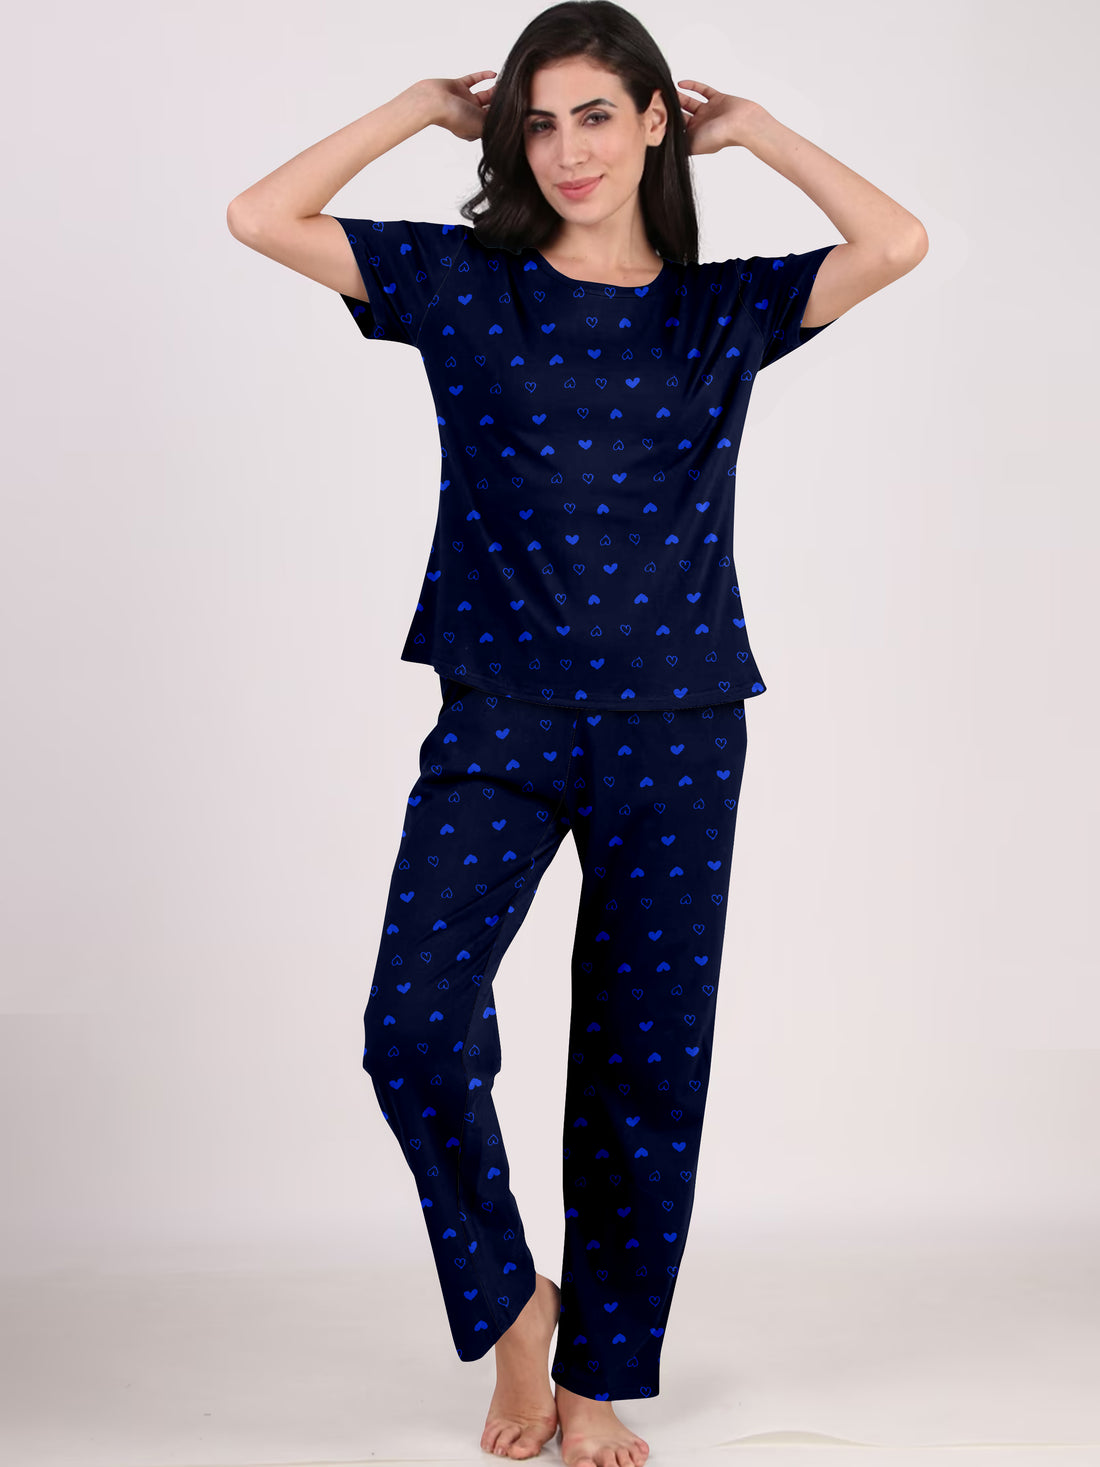 Women's And Girl's Cotton Heart Printed Navy Blue Night Suit Set of T-Shirt & Pyjama.